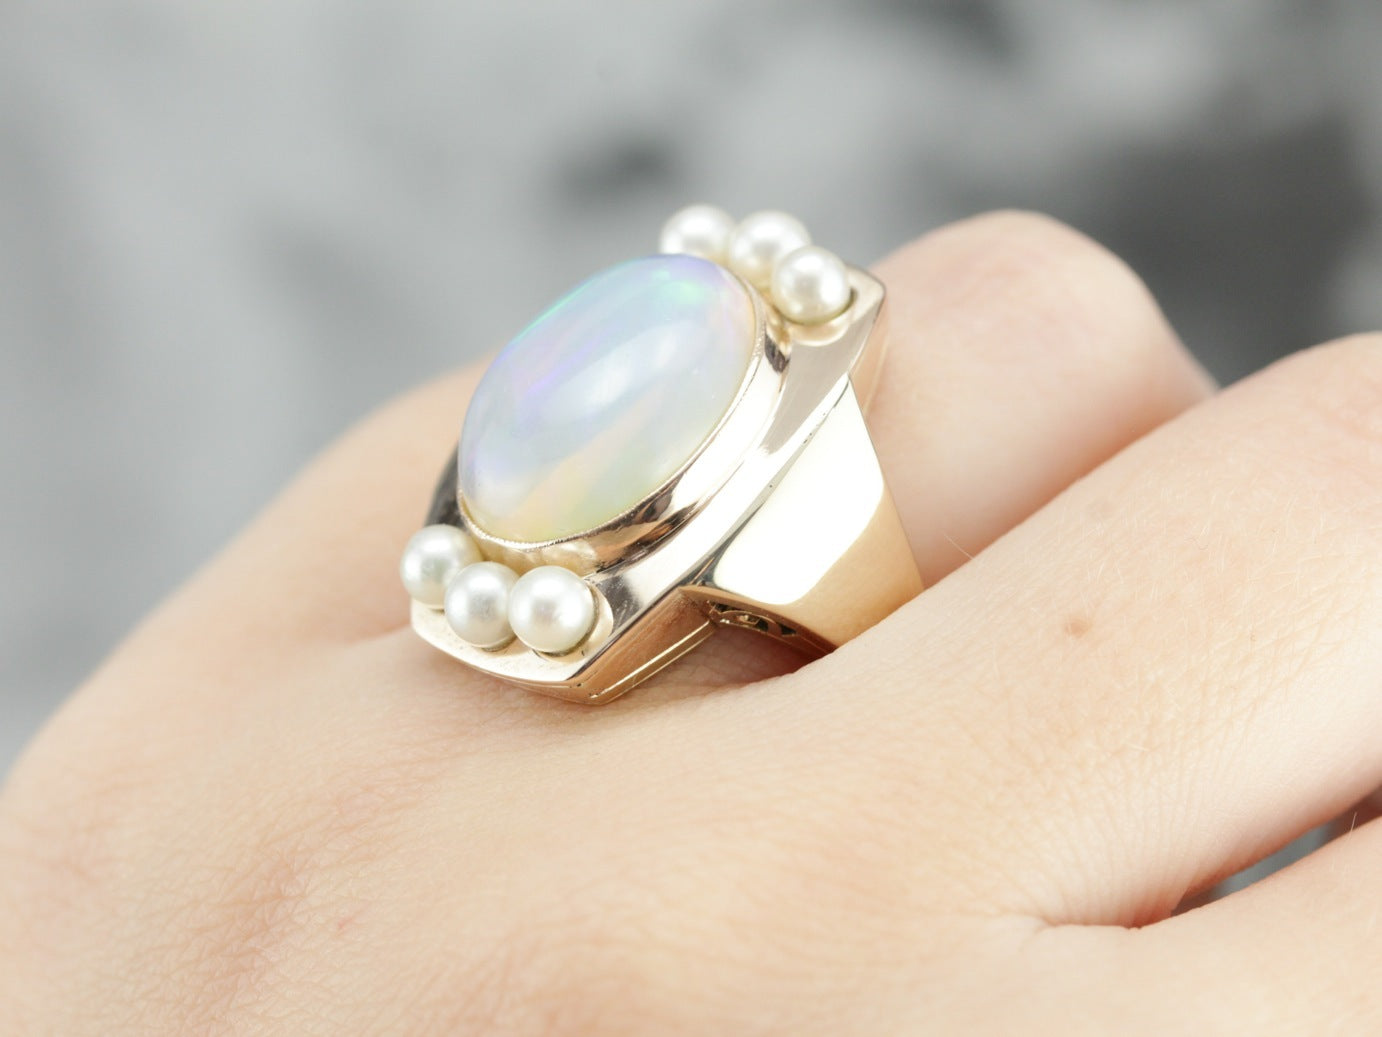 Silver Oval Mens Ring with Mother of Pearl Inlay » Anitolia